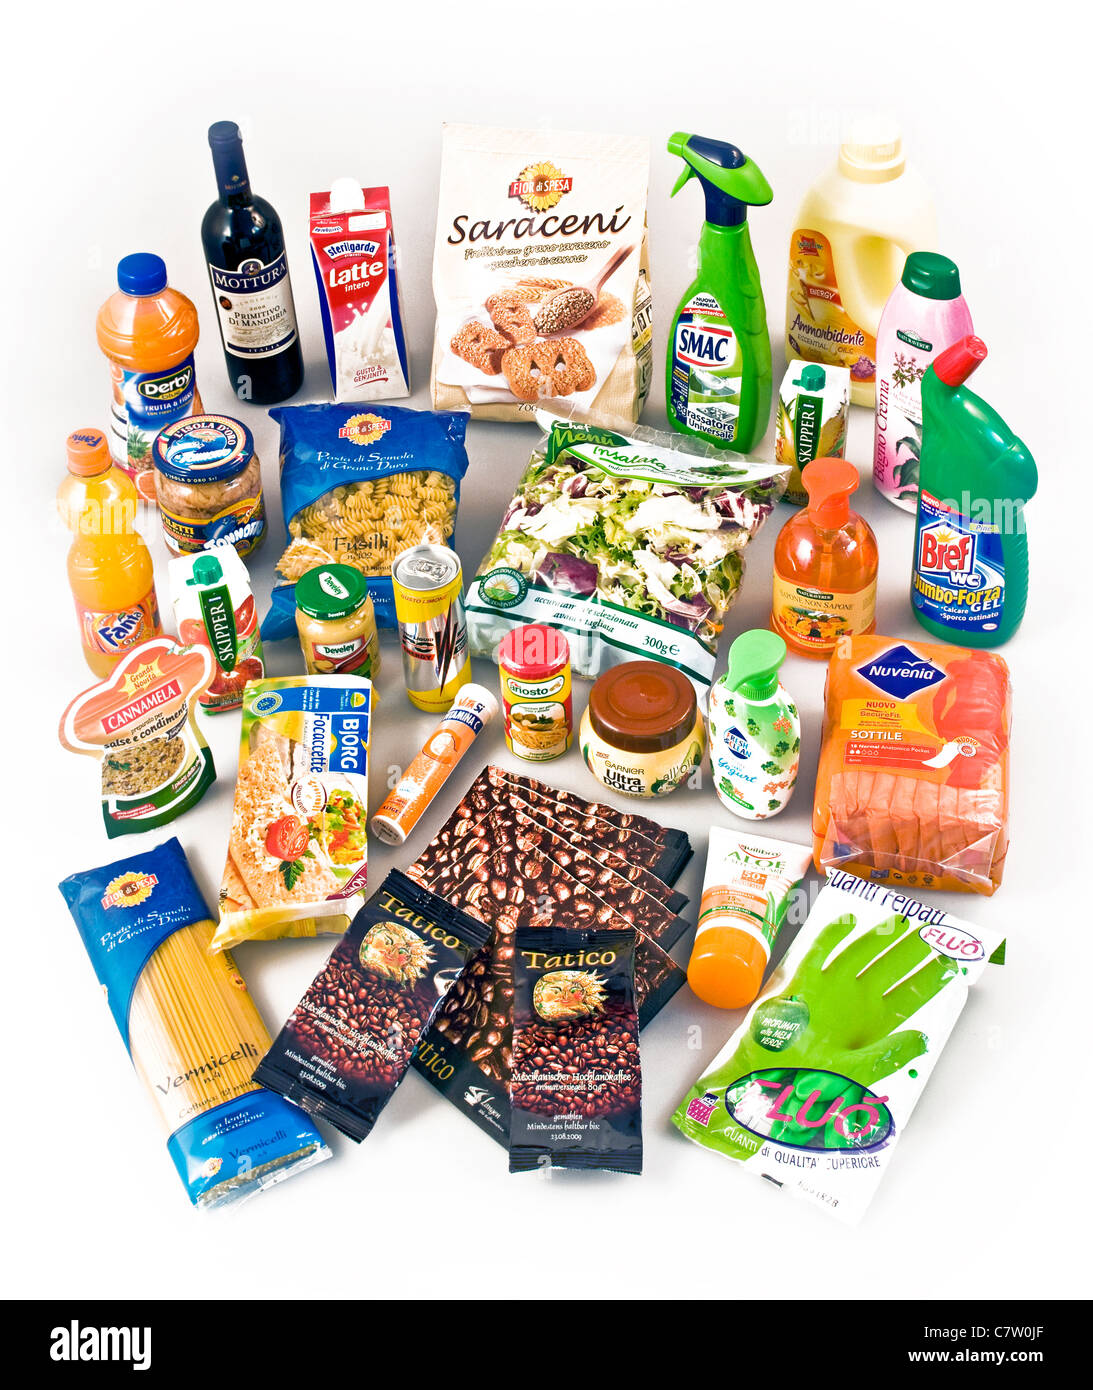 Assorted food, cleaning and beauty products Stock Photo